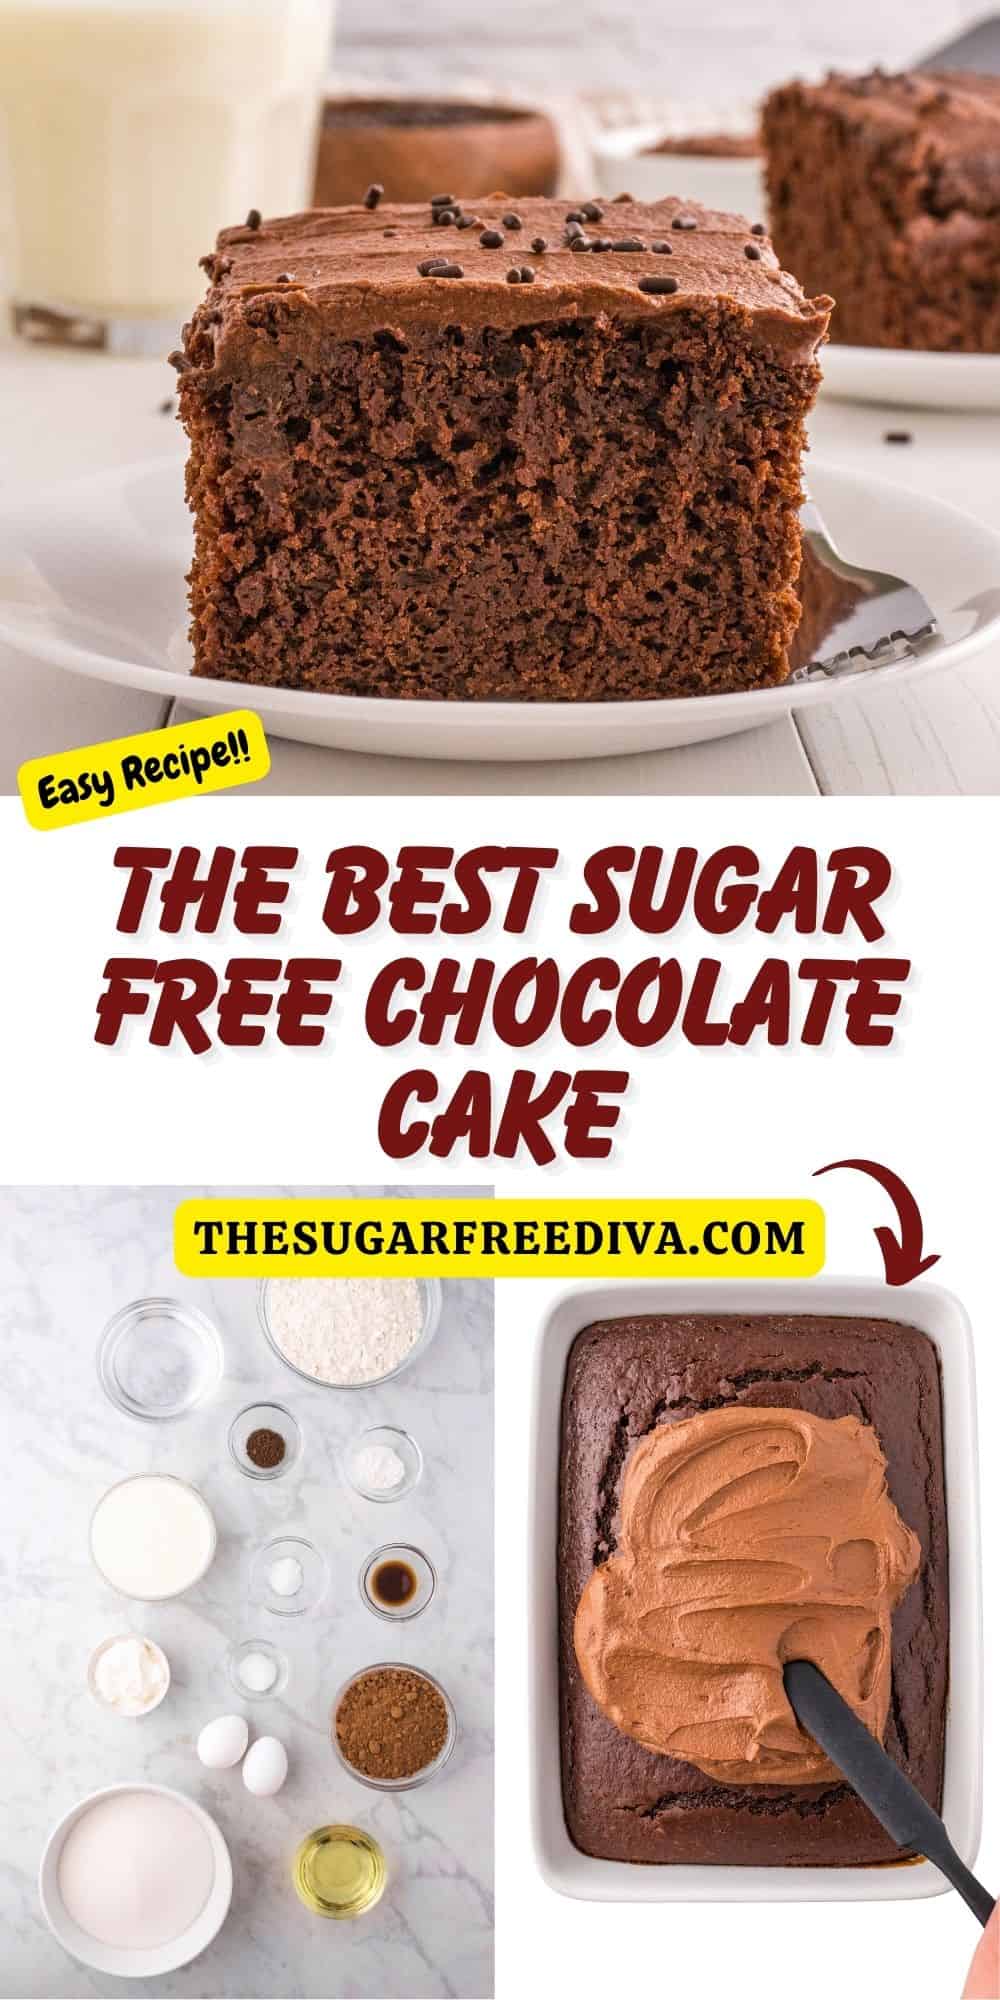 The Best Sugar Free Chocolate Cake, a moist and tender cake dessert recipe featuring a deep chocolate flavor and no added sugar.